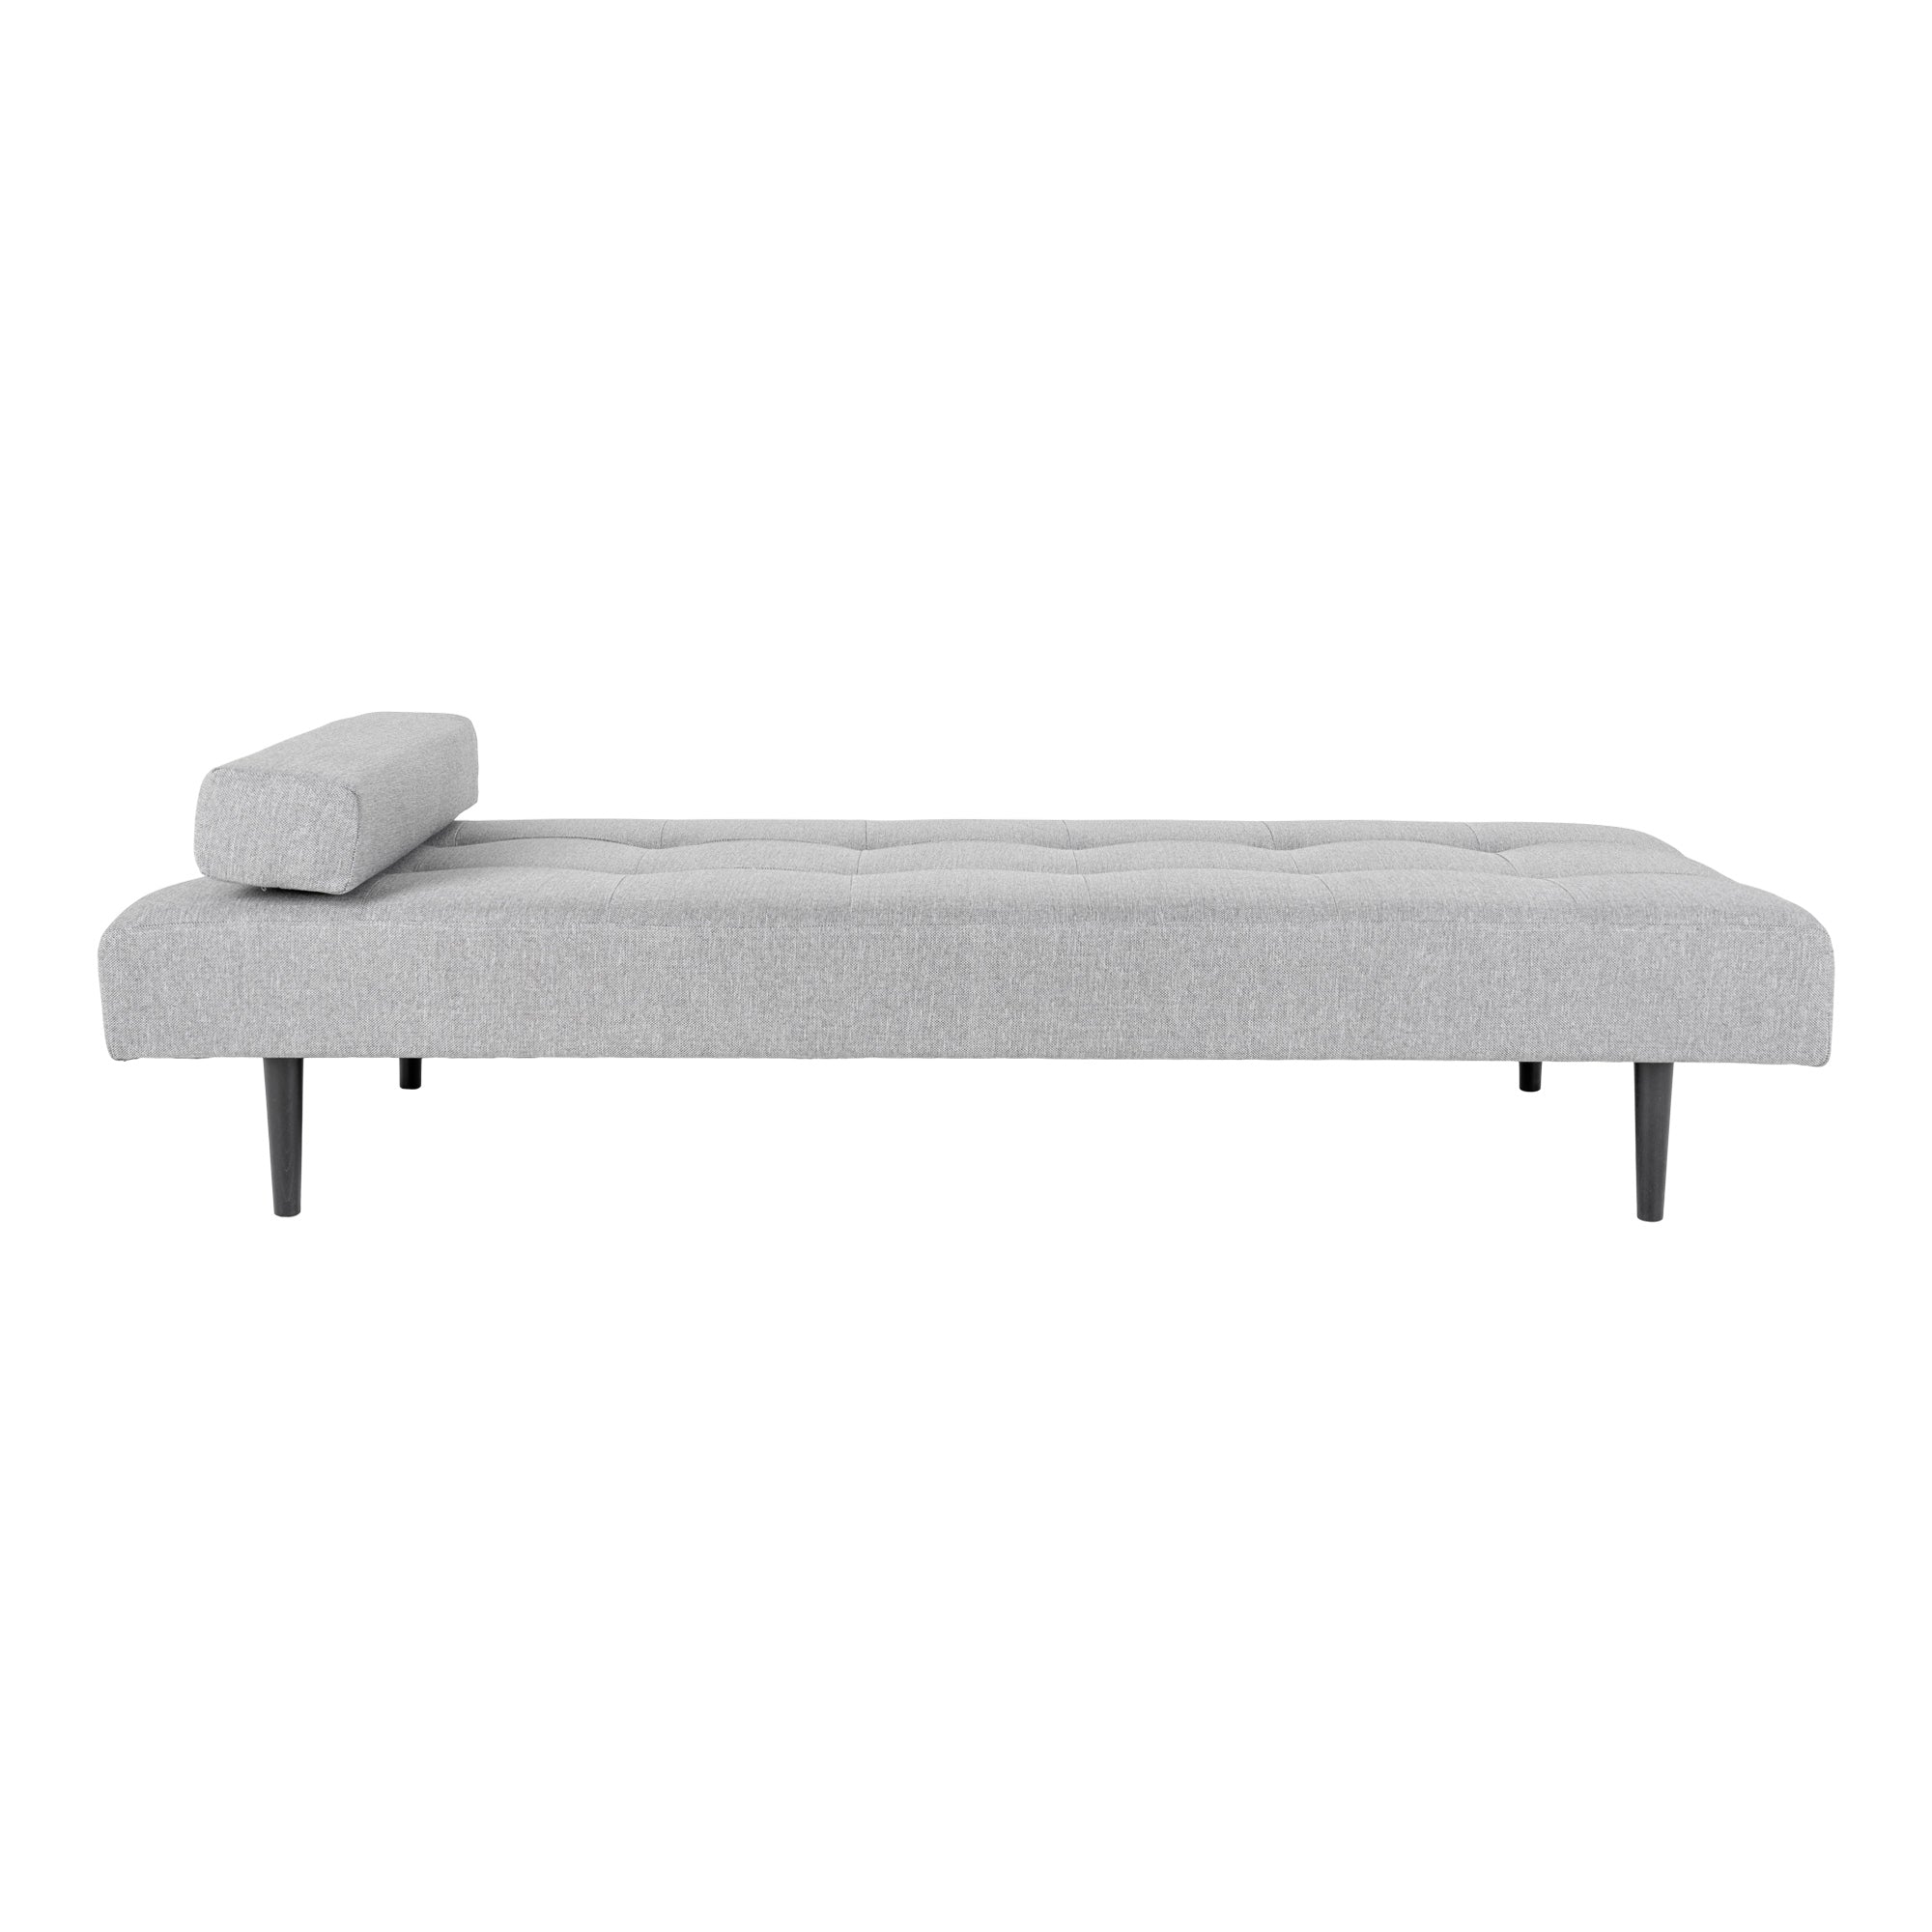 Se Duermo London Daybed hos Duermo.dk